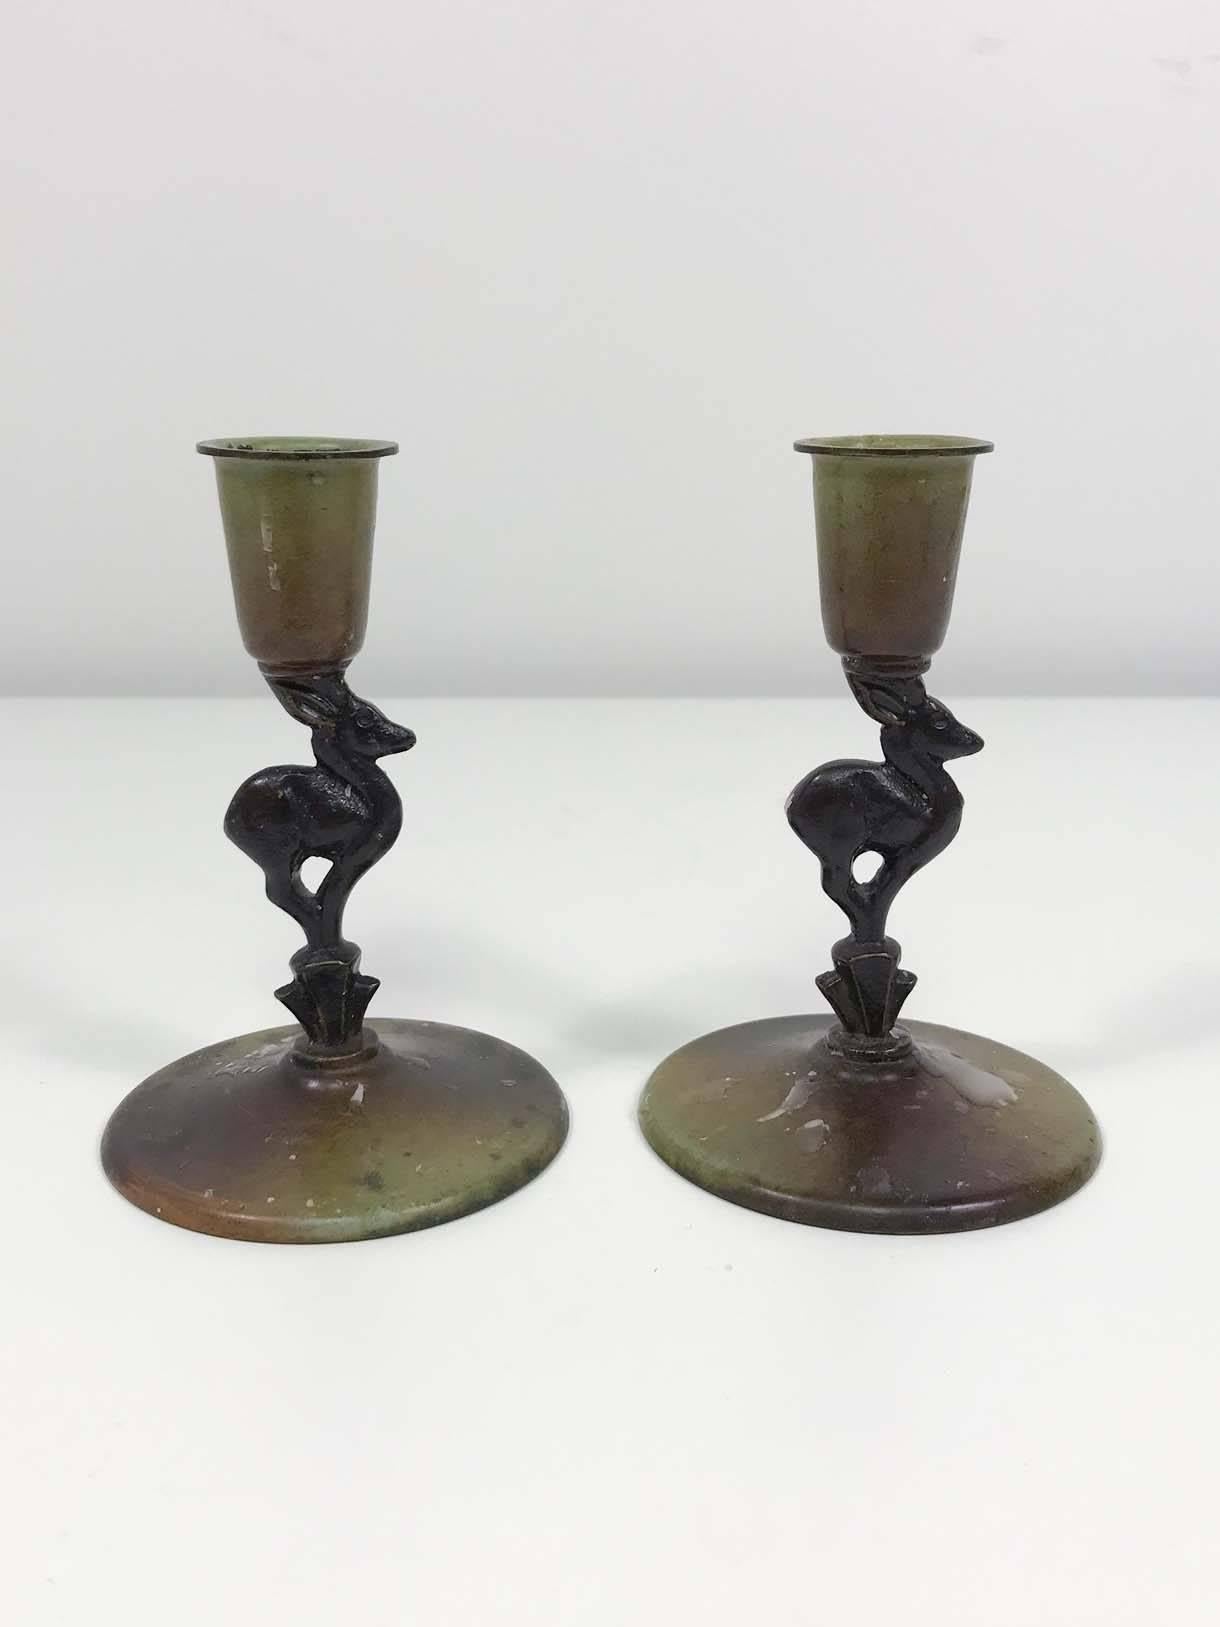 A pair of Ystad Brons fawn candleholders. Good original condition, marked on base.